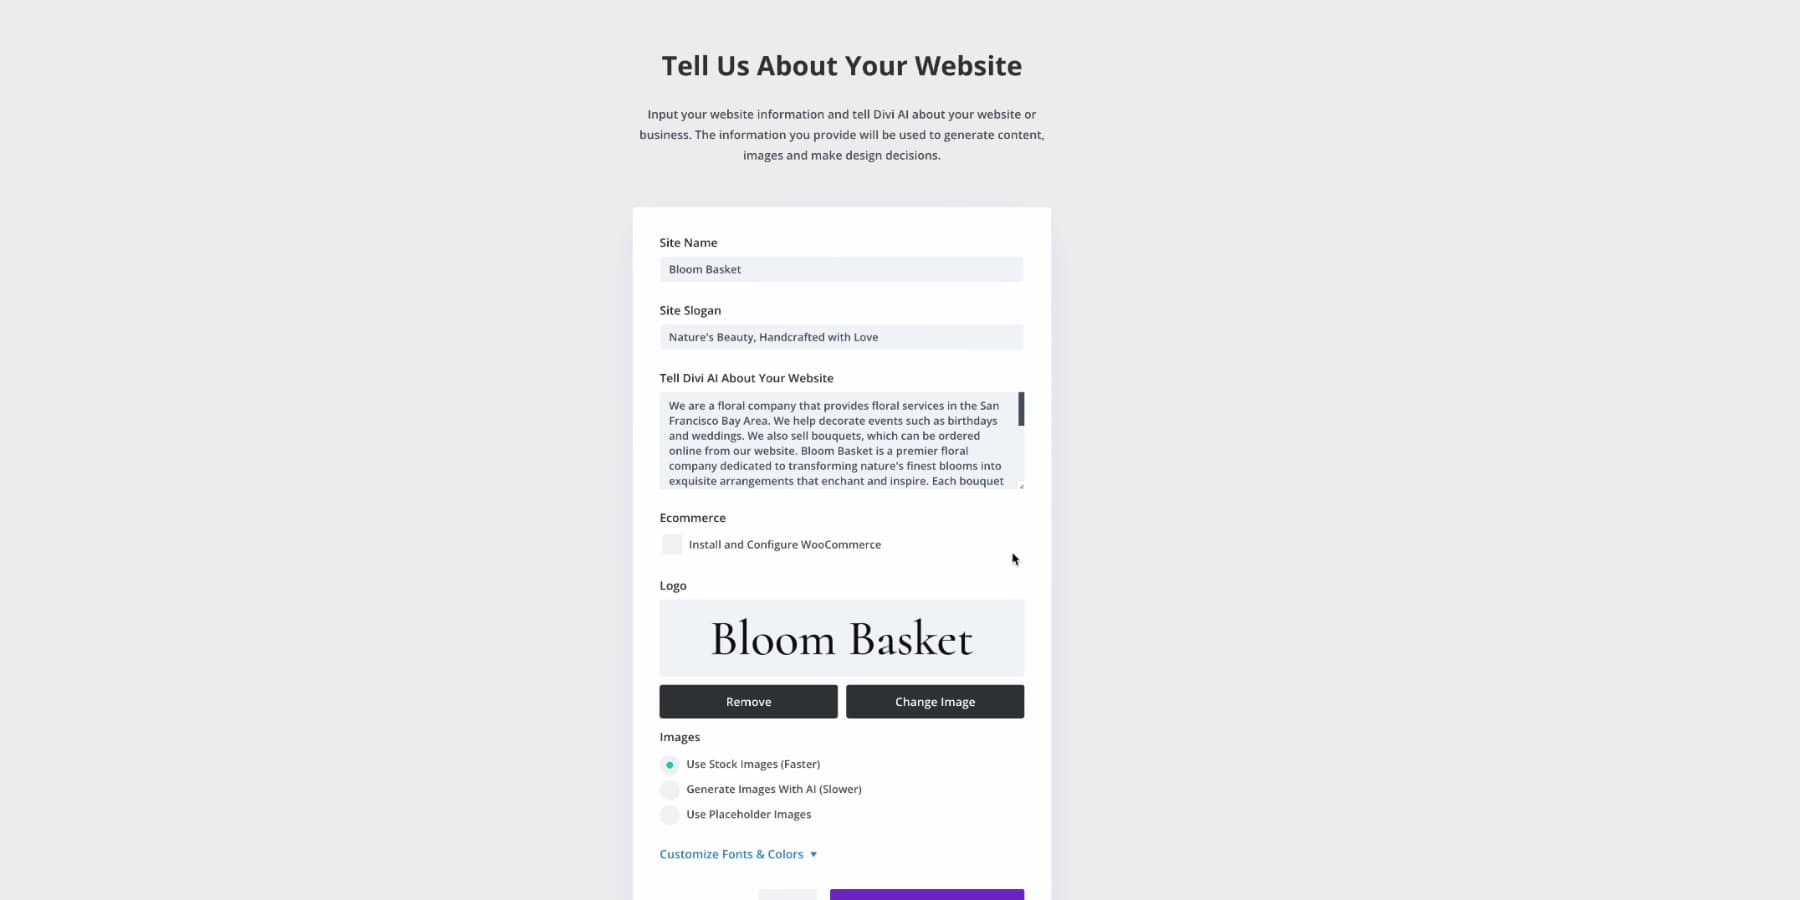 A screenshot of Divi's New Quick Sites AI in action